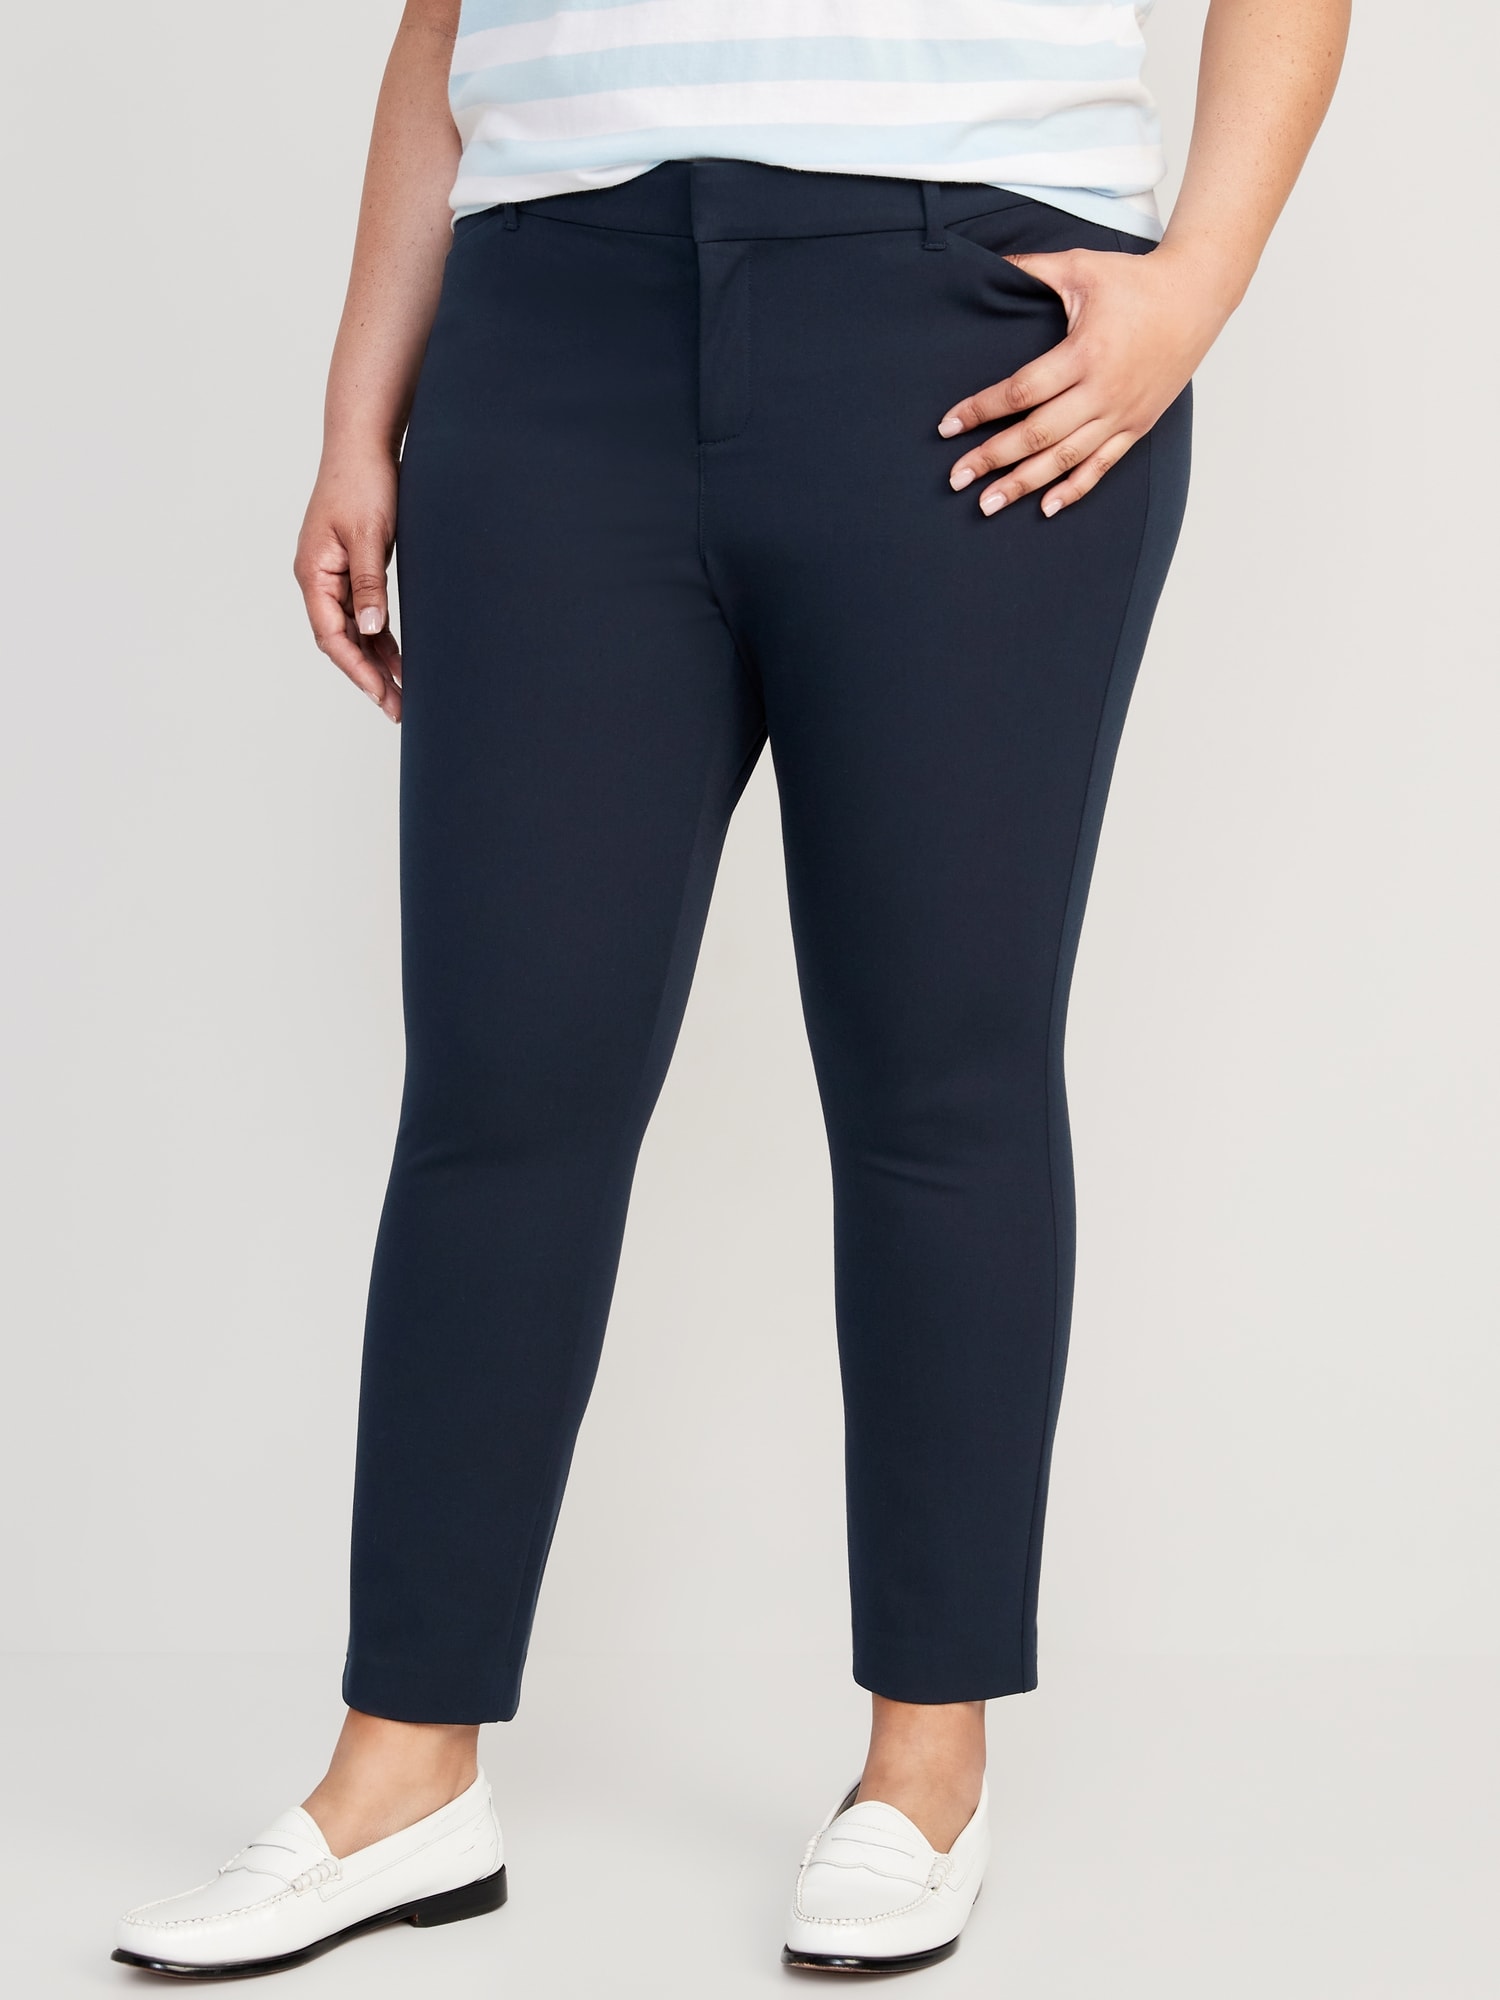 Old Navy All-New Mid-Rise Pixie Ankle Pants, These $35 Pants Look Like  Work Trousers, but Honestly, They Feel Like Sweatpants